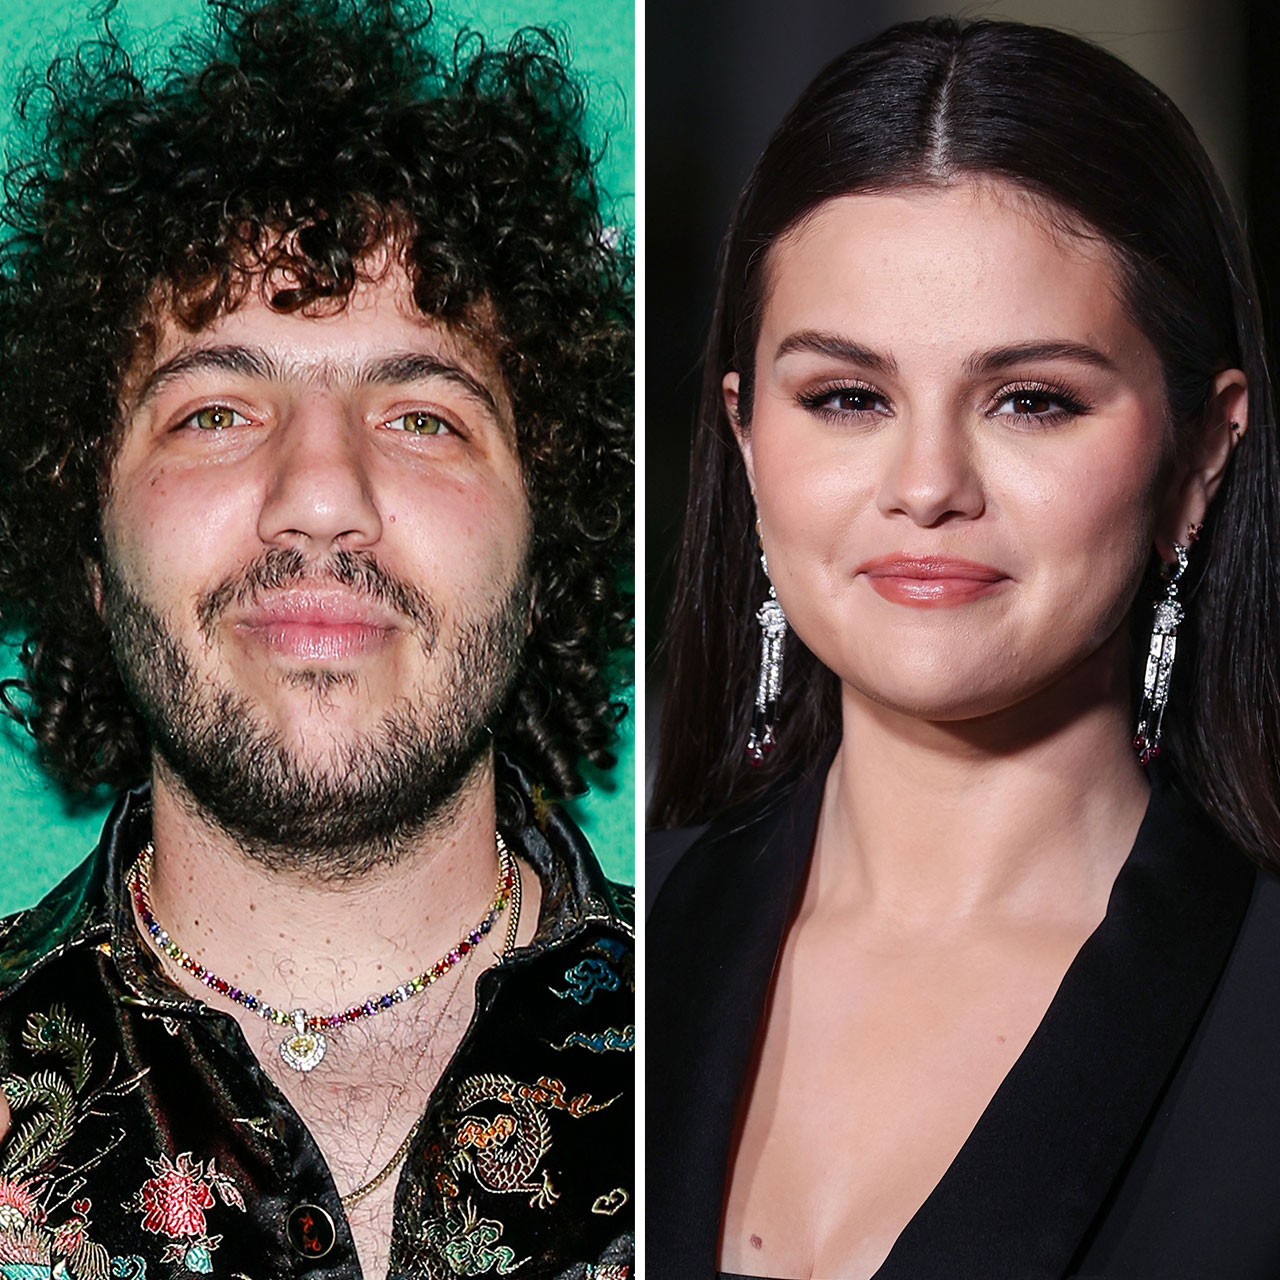 Selena Gomez Is “Leaving Insta” After Confirming Romance With Benny ...